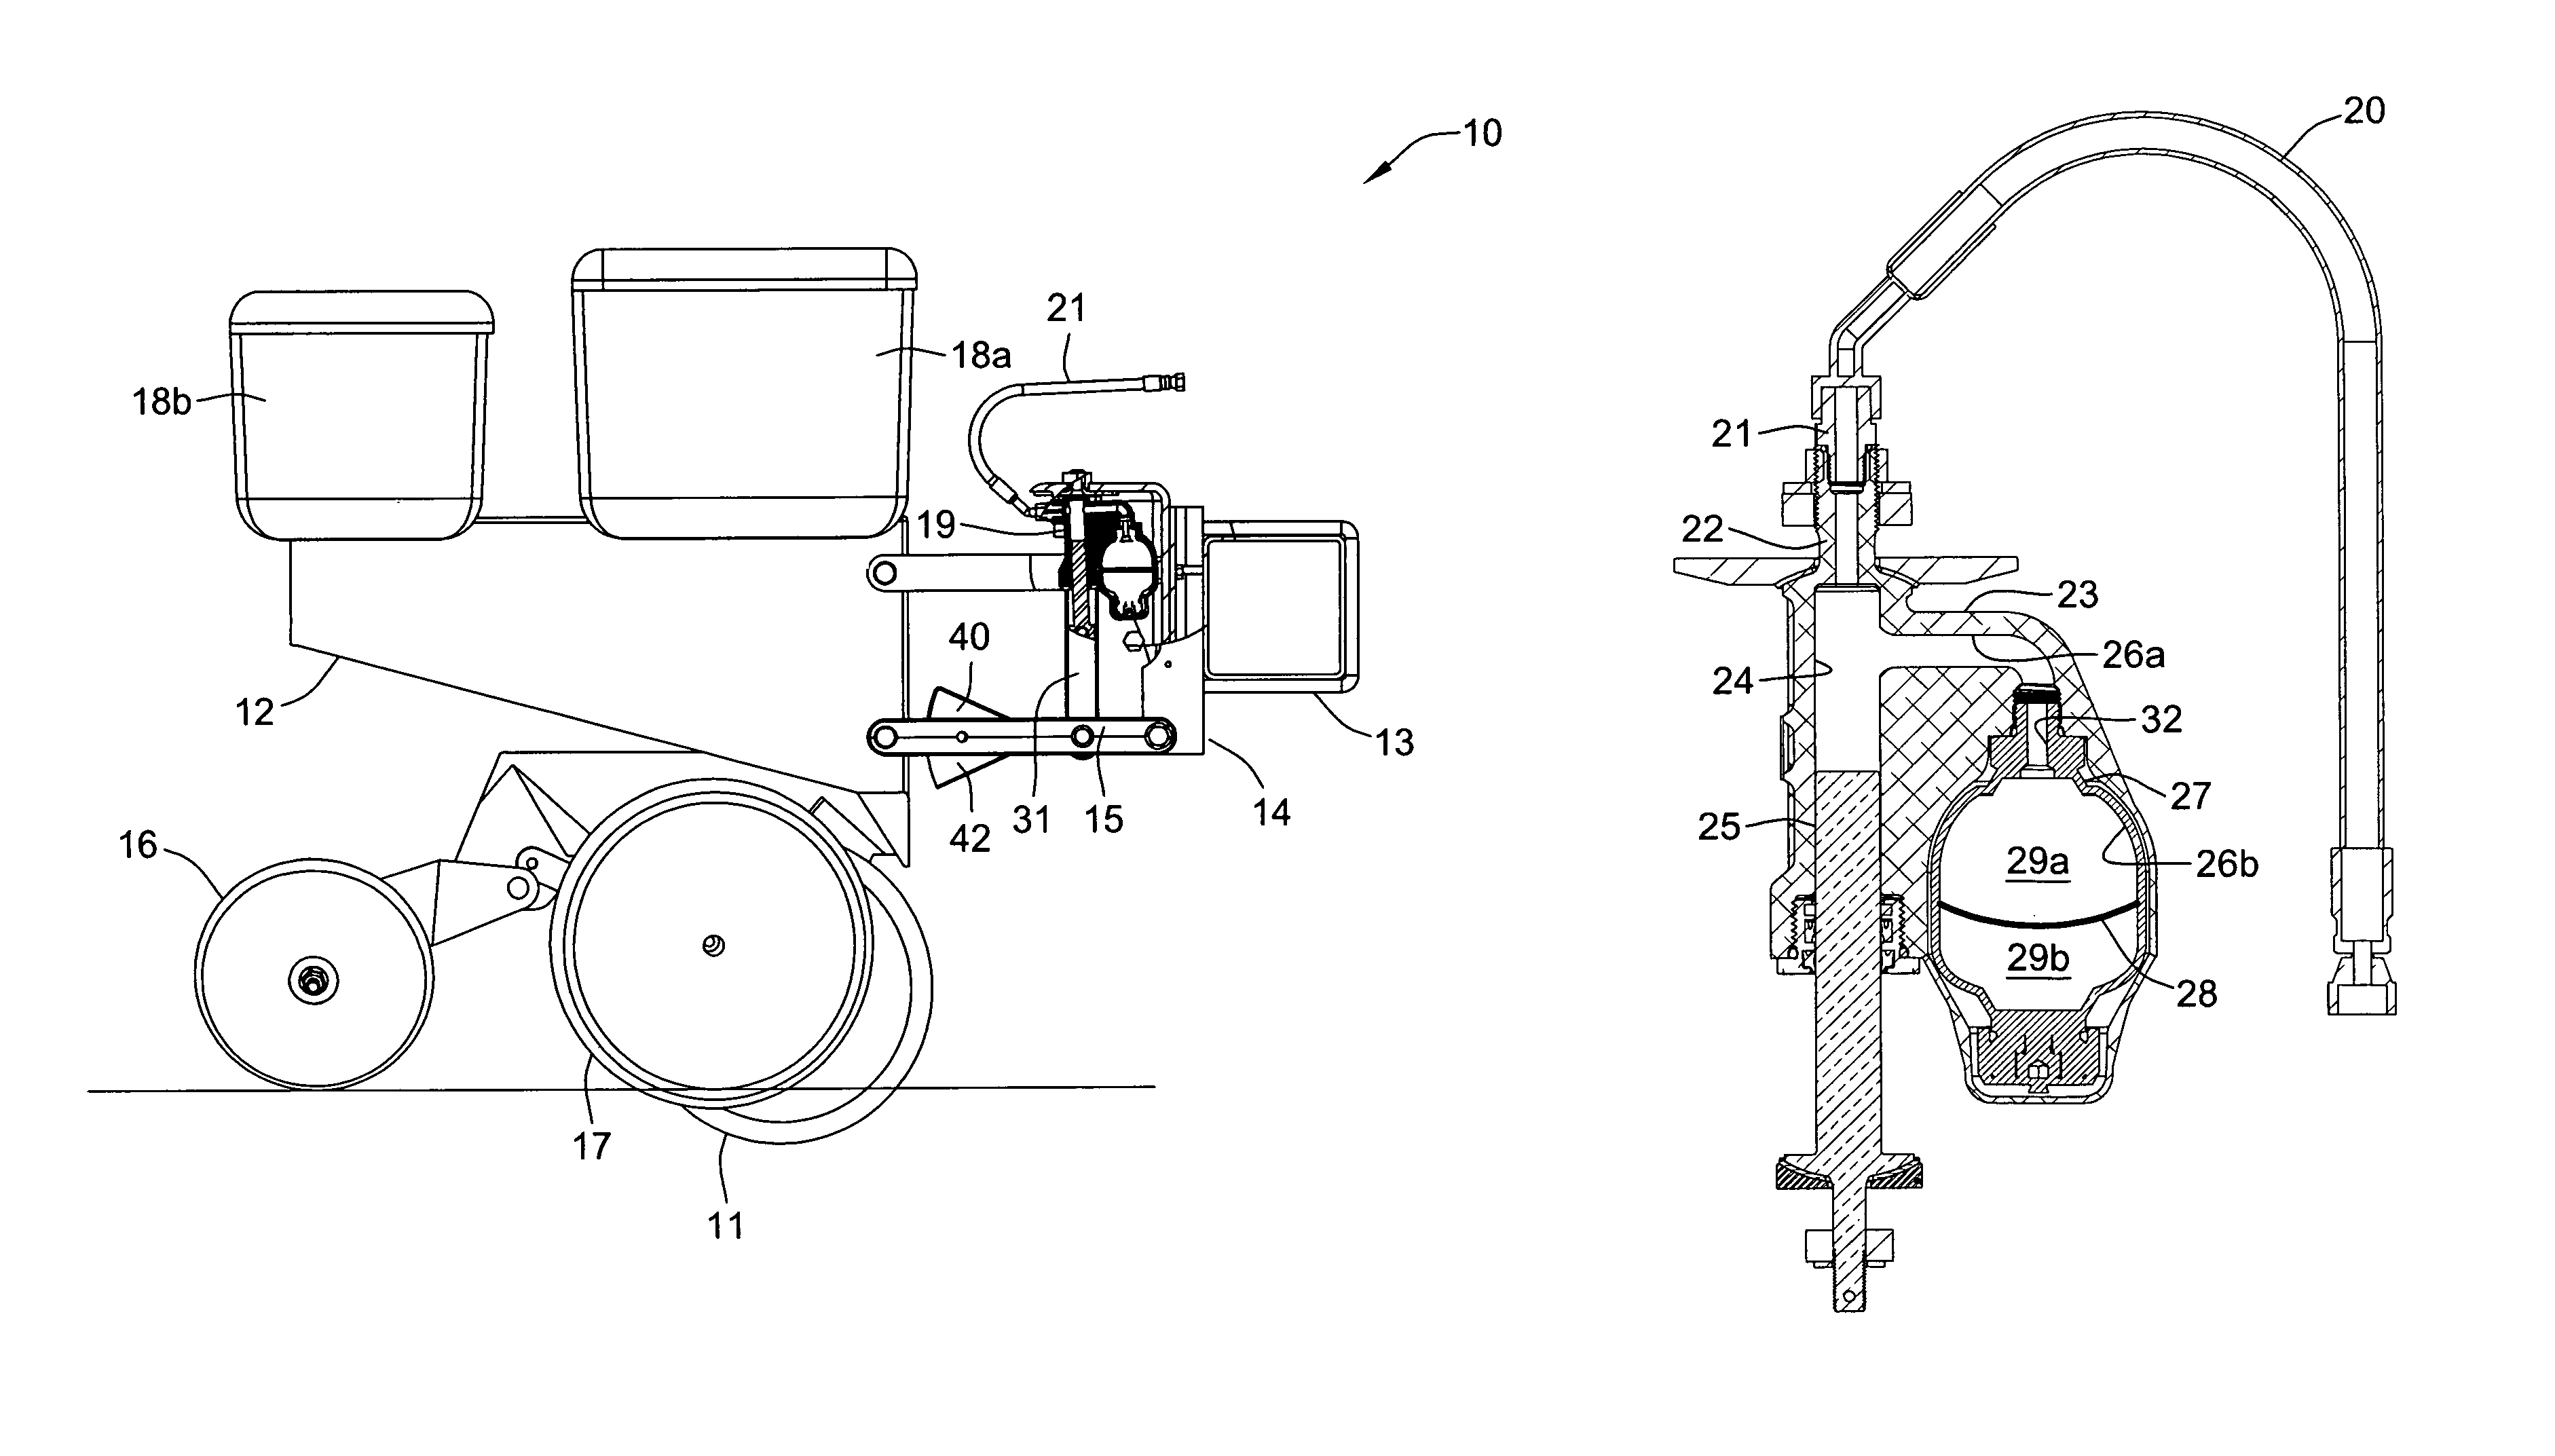 Hydraulic down pressure control system for an agricultural implement